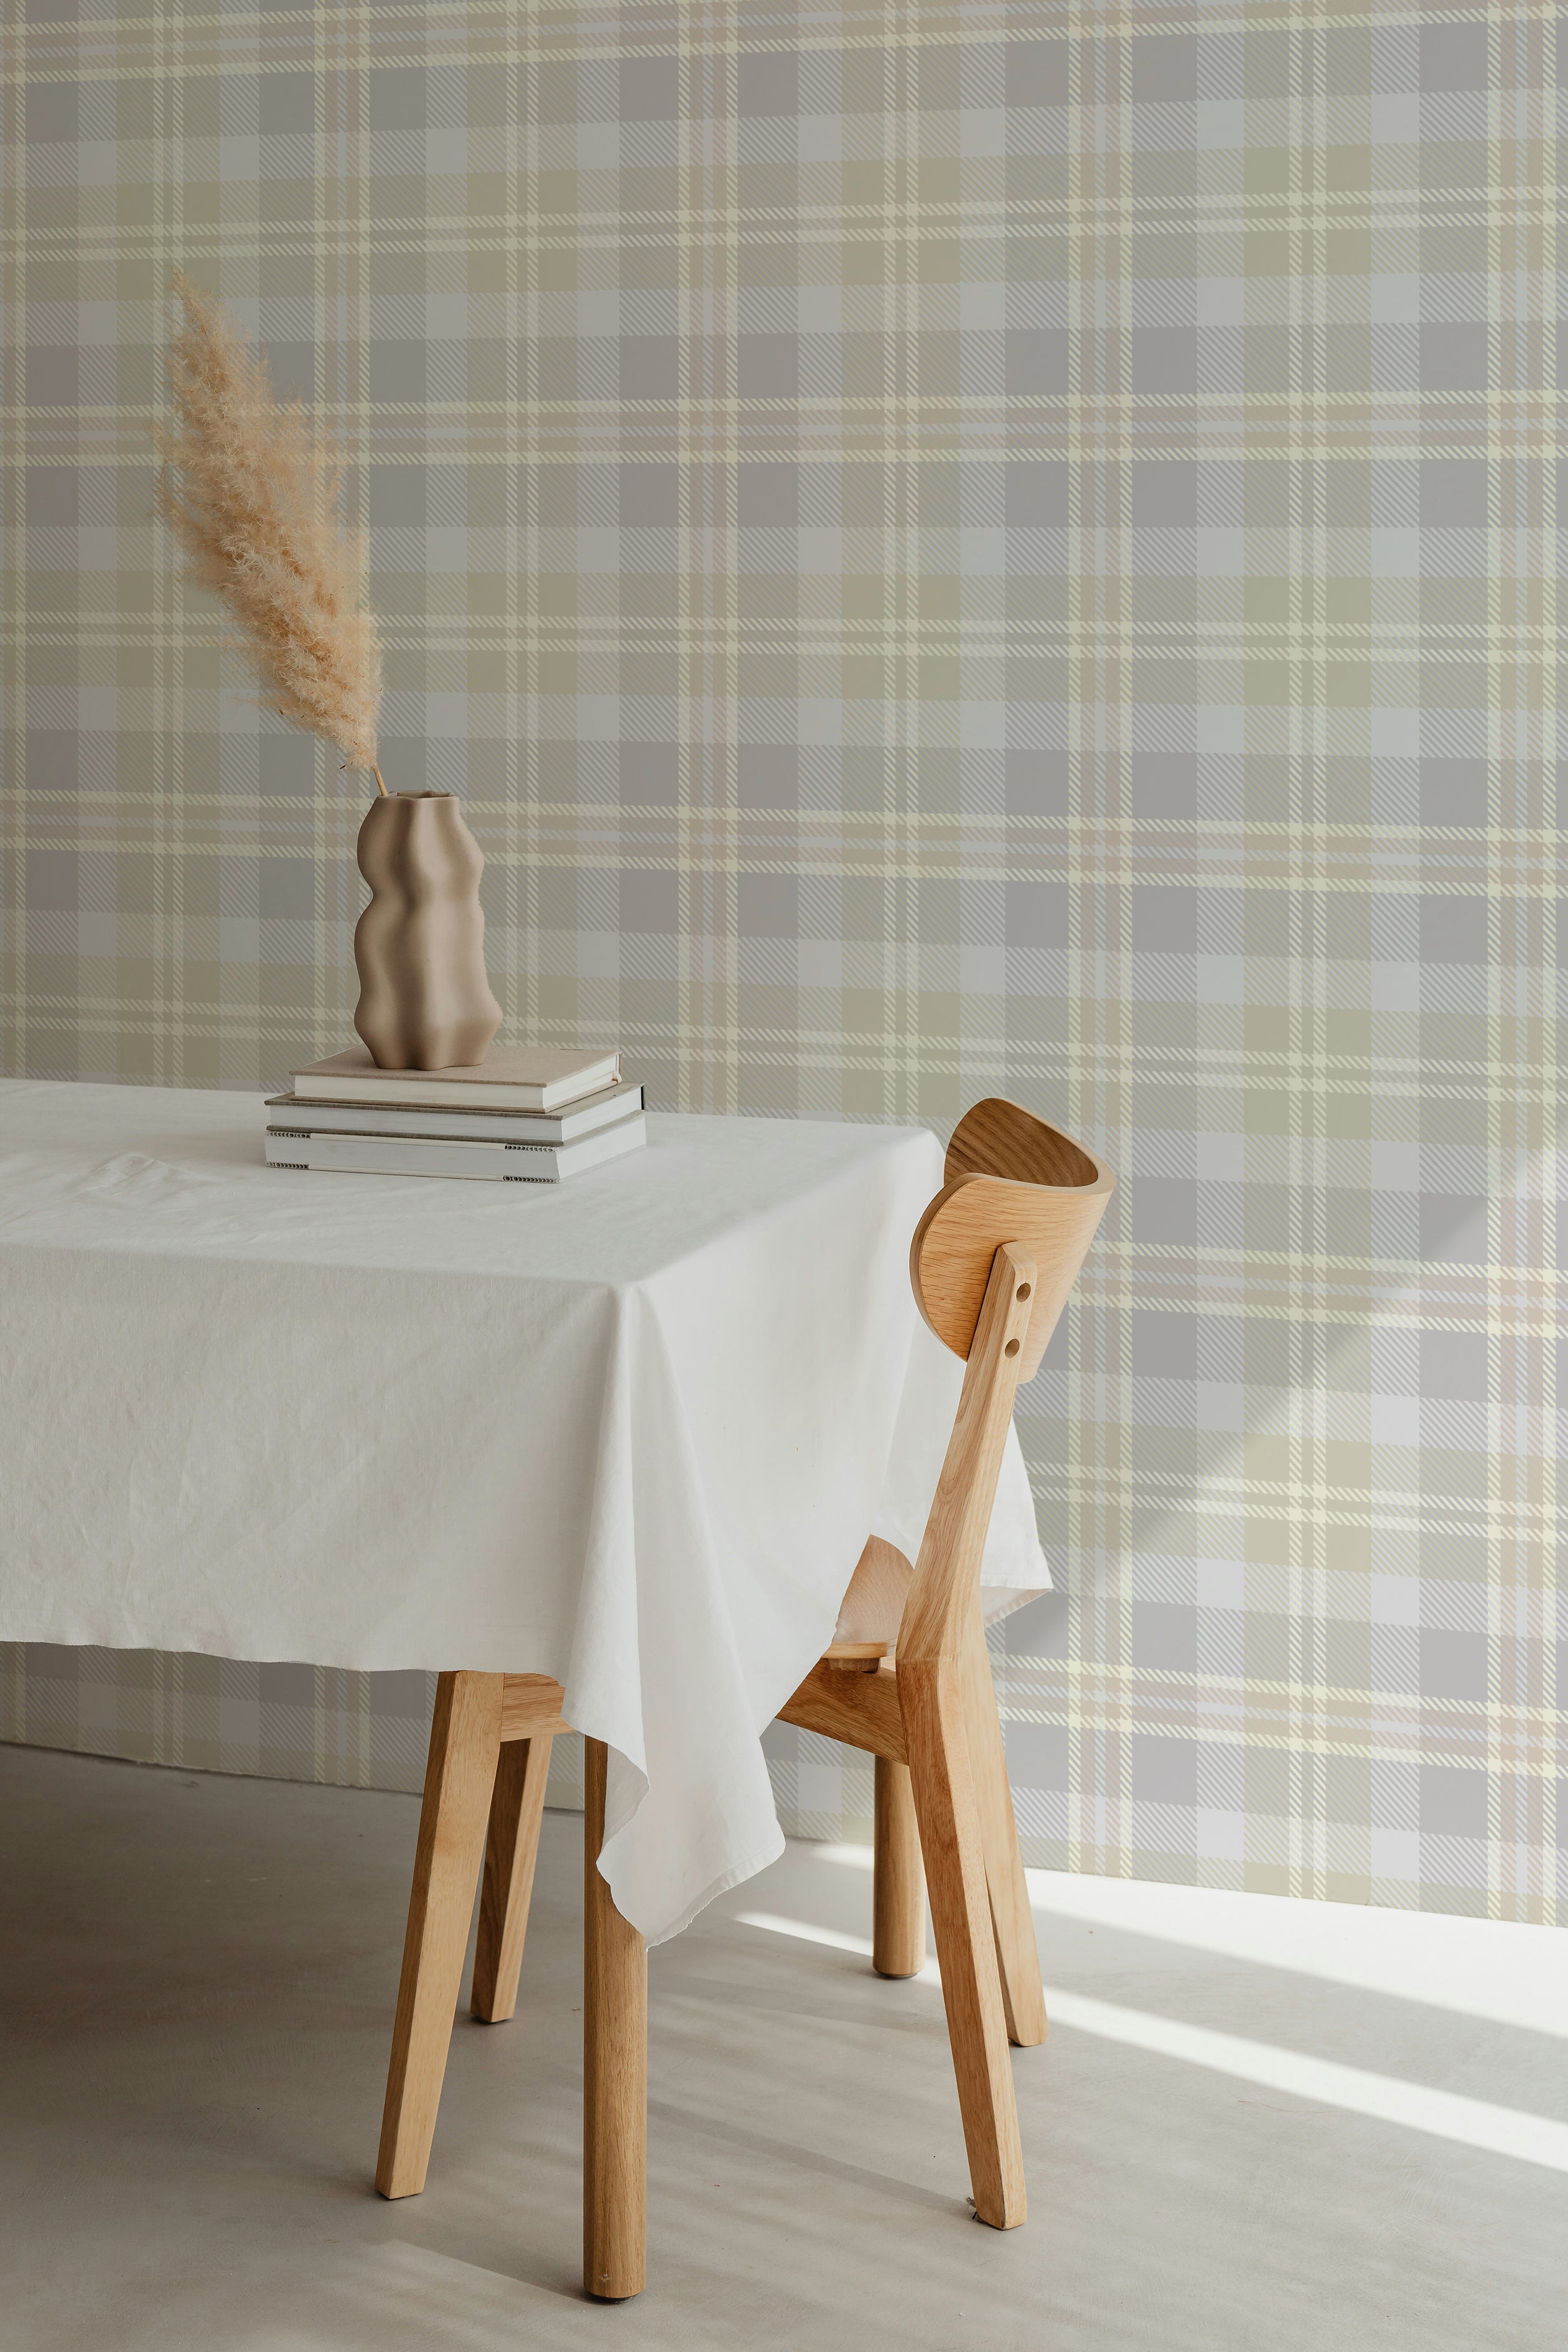 Interior view with Heirloom Tartan Plaid Wallpaper, showcasing a classic tartan pattern in neutral tones of gray, beige, and white. The wallpaper adds a cozy and traditional feel to the dining area, complemented by a simple wooden table and chair.